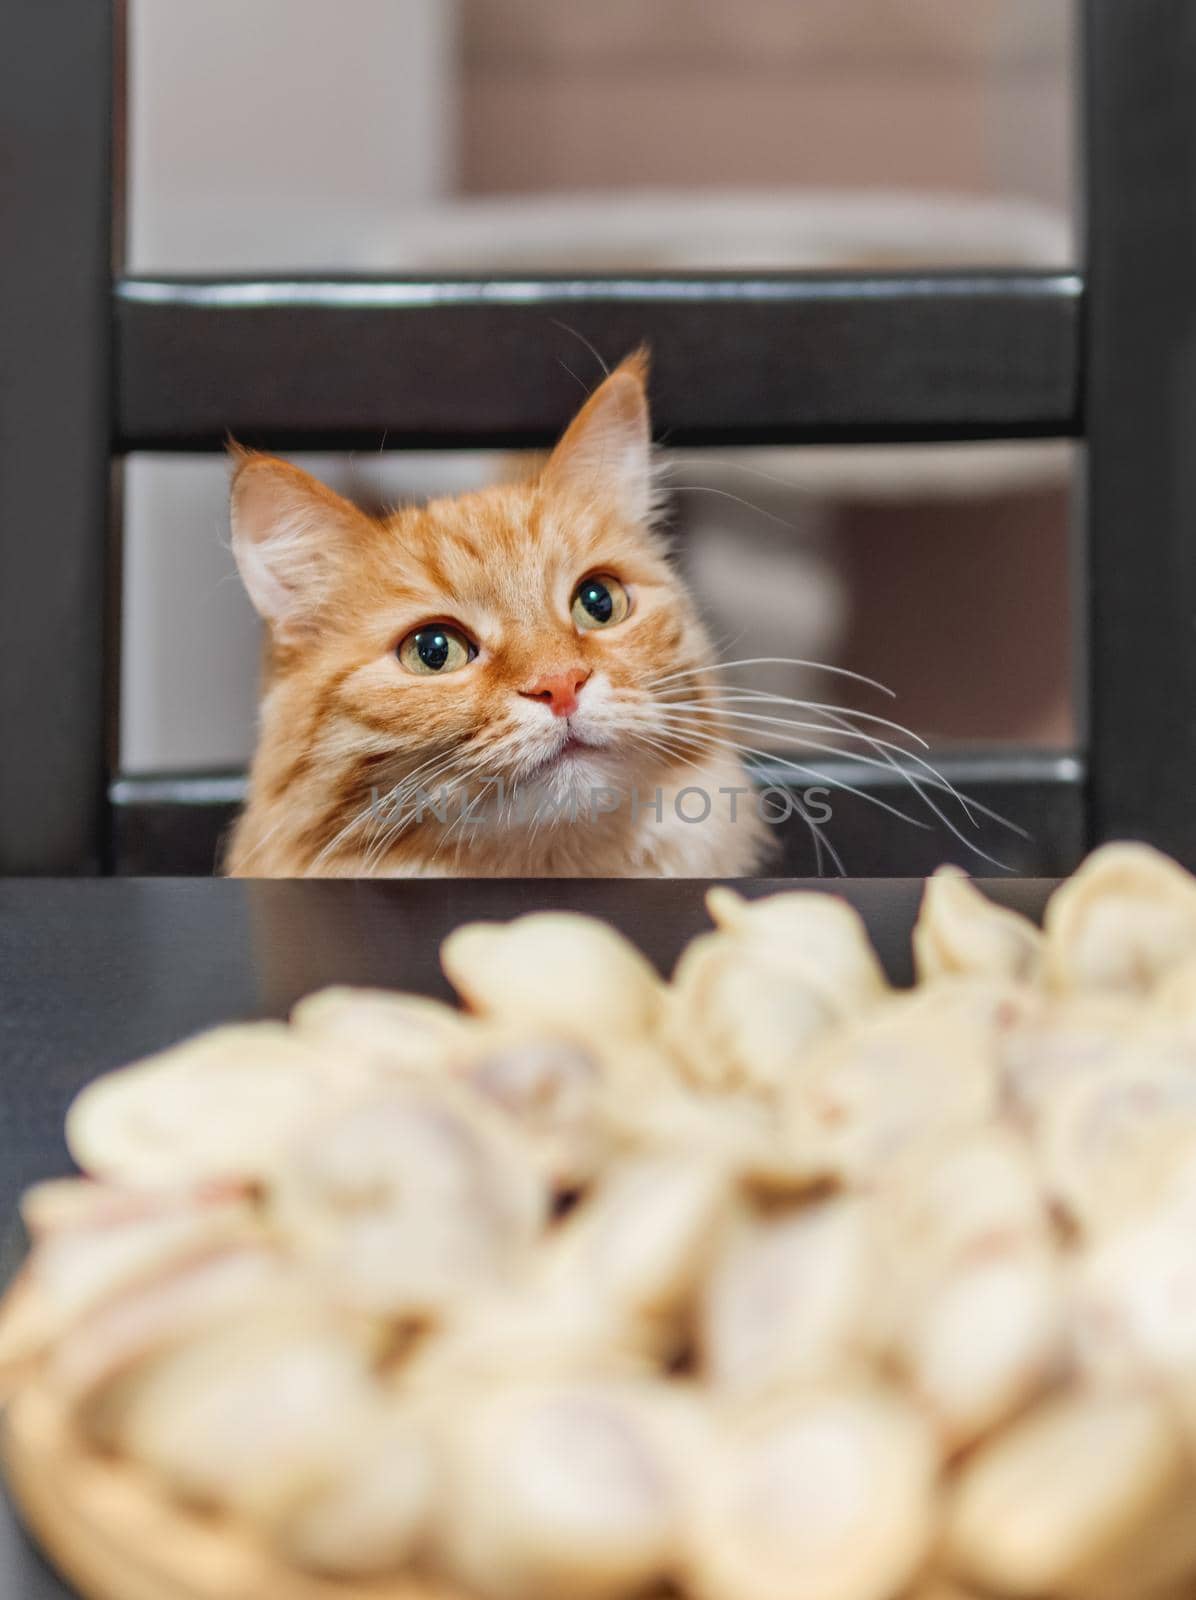 Cute ginger cat sits on chair near kitchen table with cooked pelmeni on plate. Fluffy pet is asking for traditional Russian food made of dough and meat.